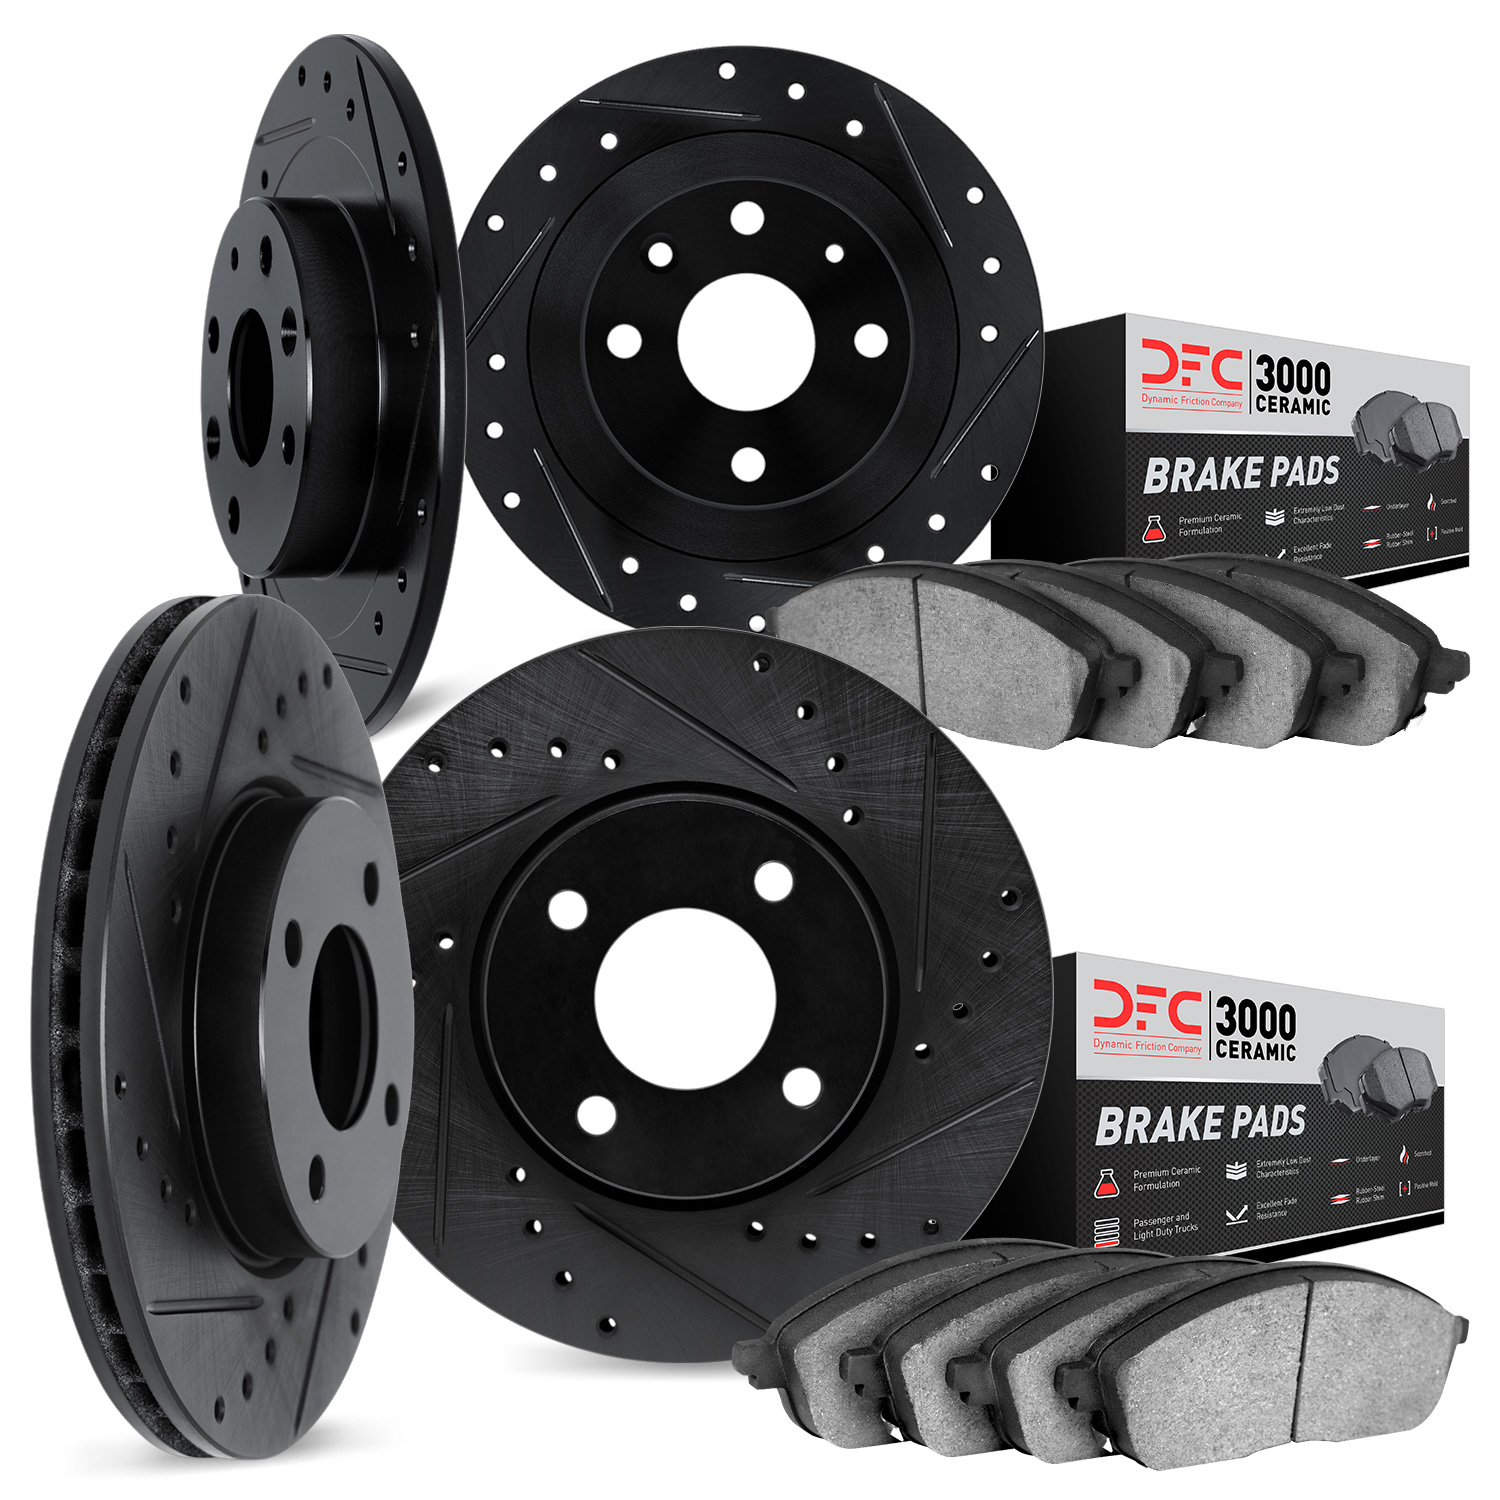 8304-31019 Drilled/Slotted Brake Rotors with 3000-Series Ceramic Brake Pads Kit [Black], 1988-1990 BMW, Position: Front and Rear